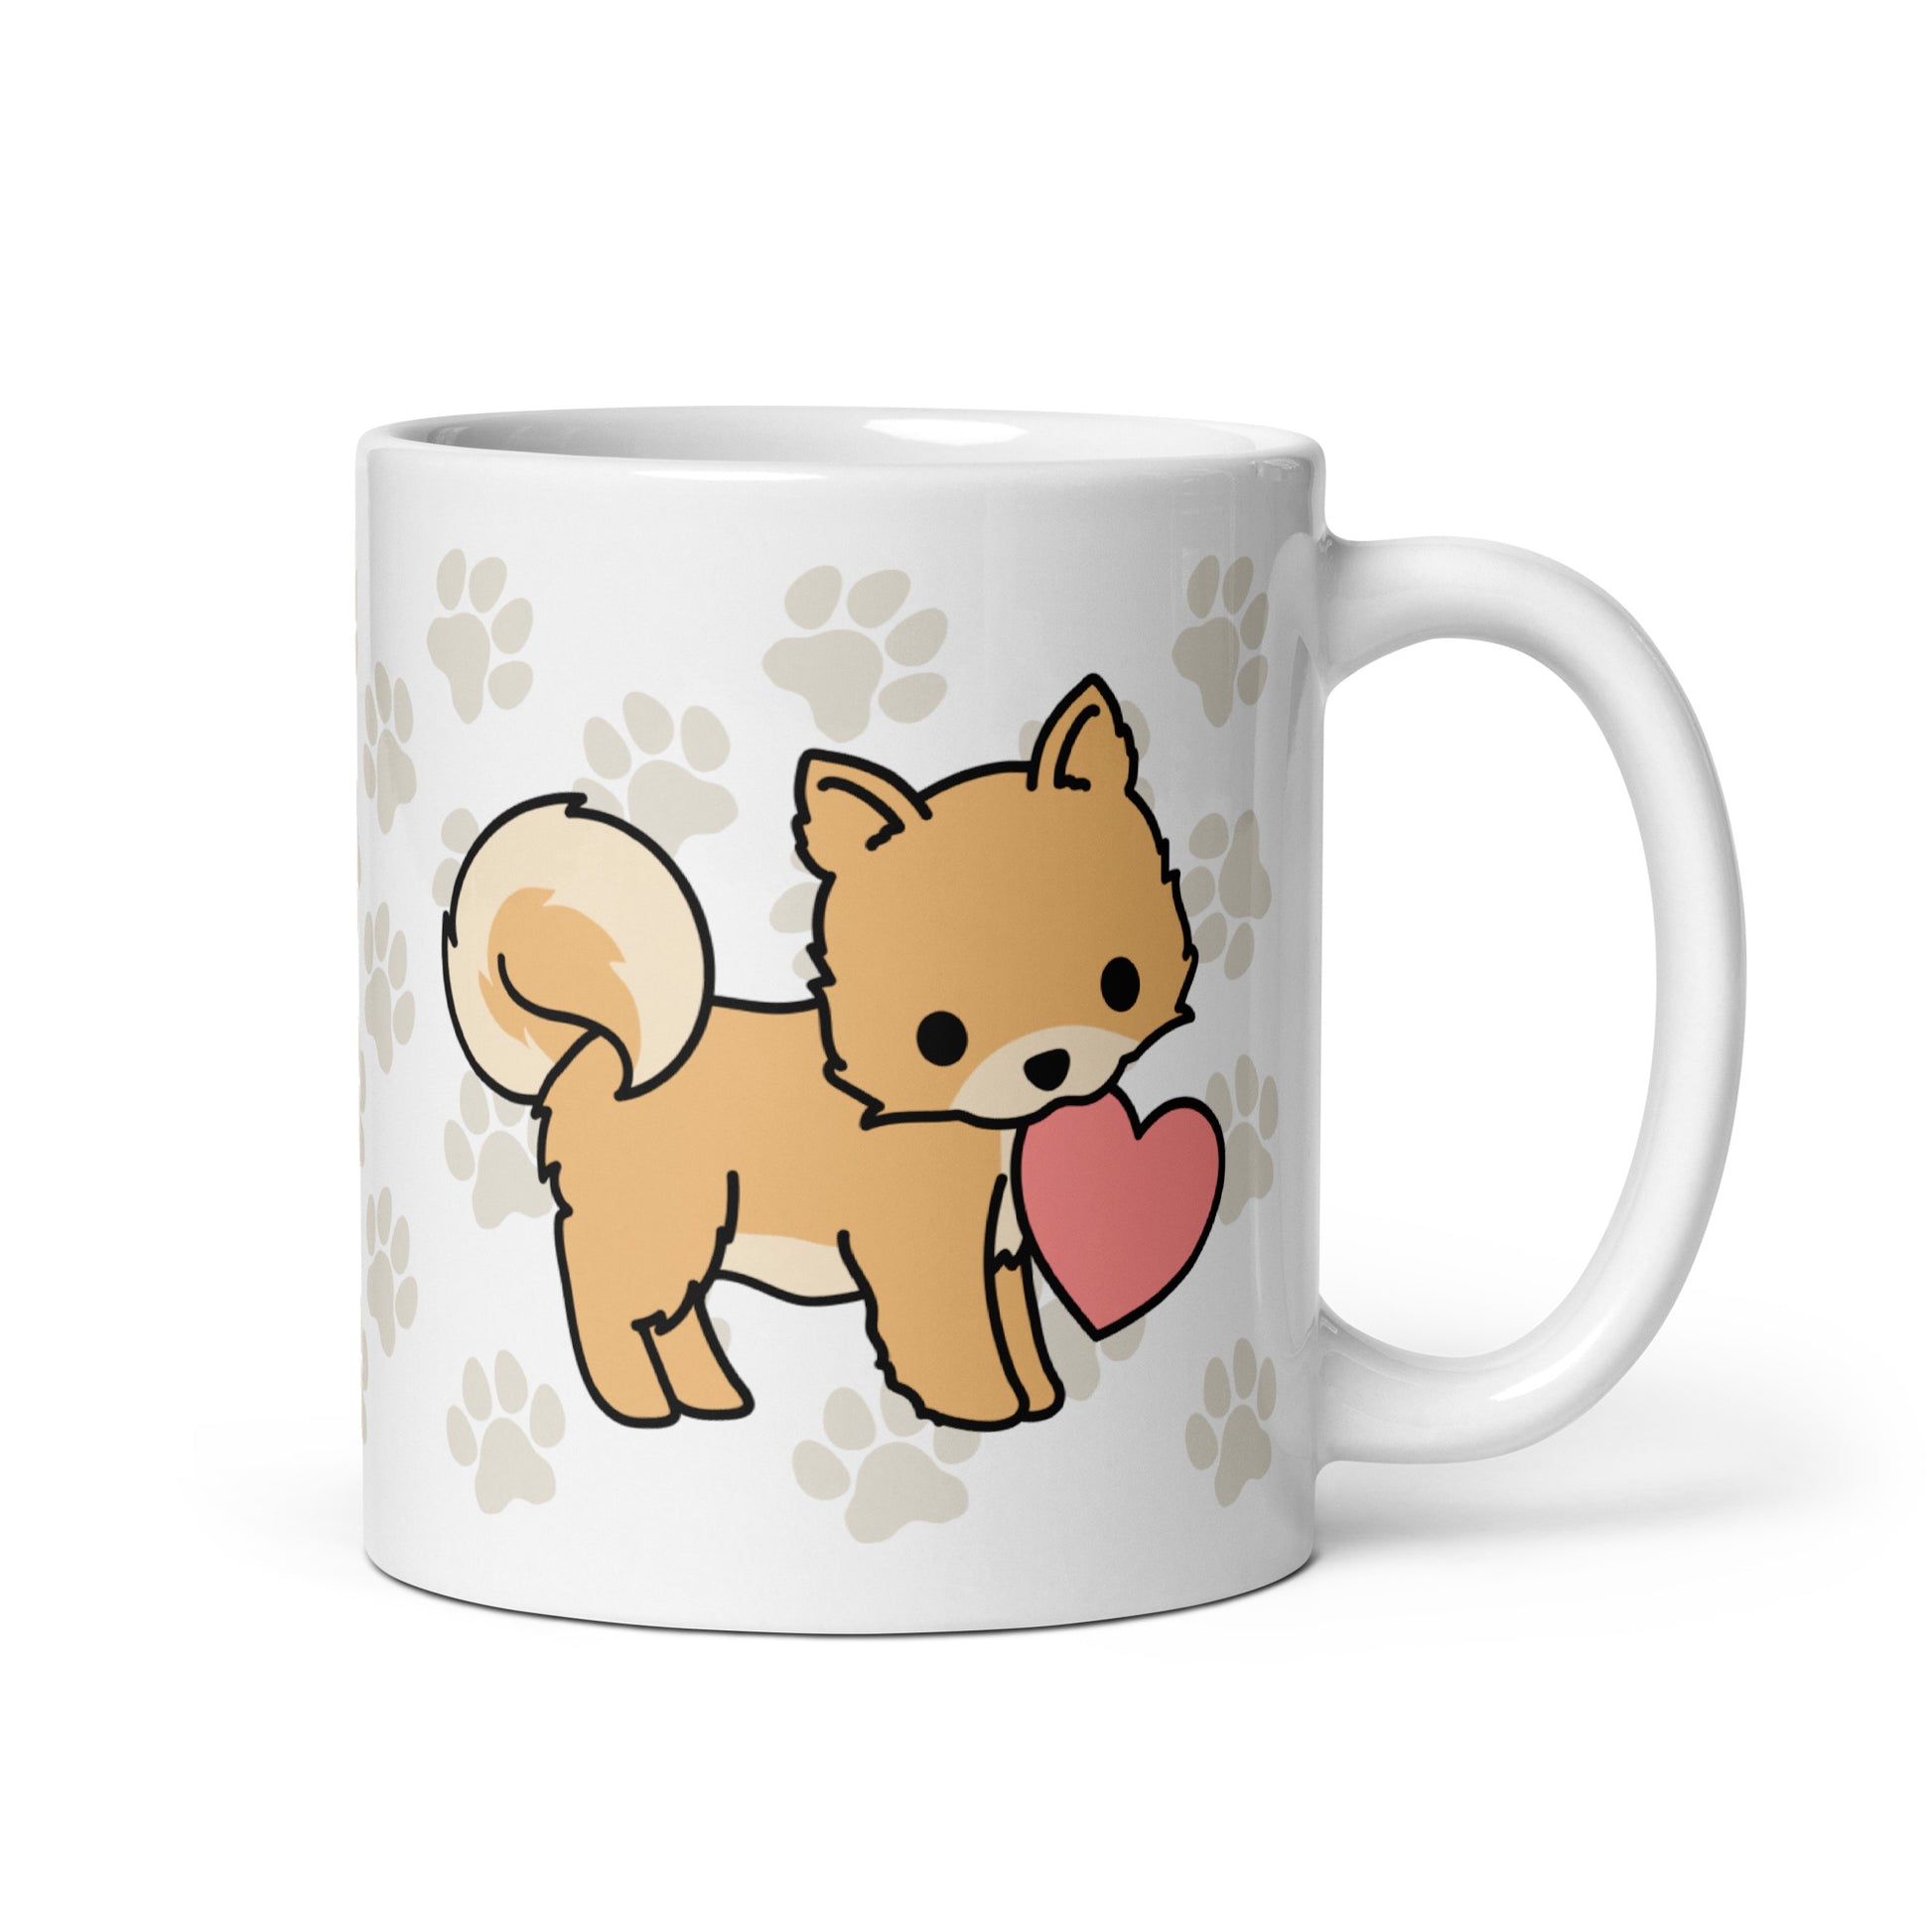 A white 11 ounce ceramic mug with a pattern of light brown pawprints all over. The mug also features a stylized illustration of a Pomeranian holding a heart in its mouth.